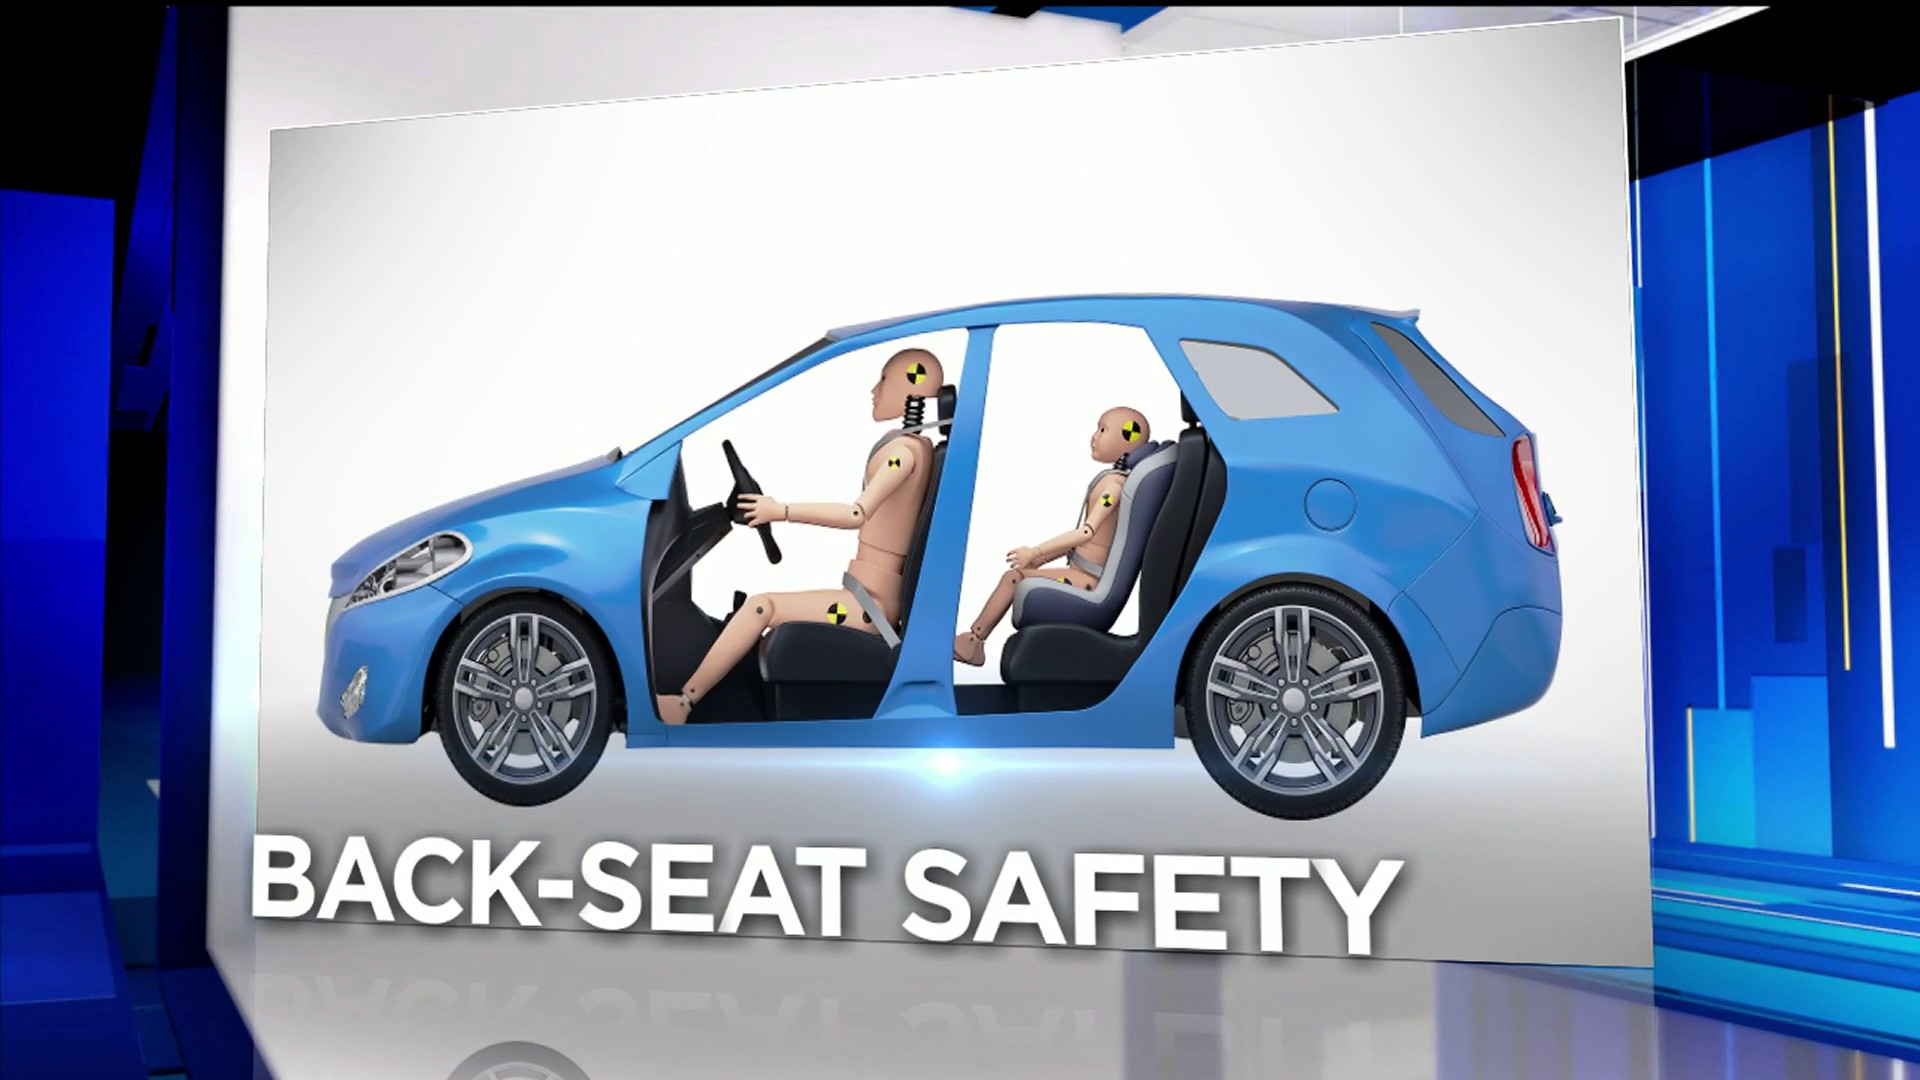 Safest Place In Car Is No Longer The Back Seat